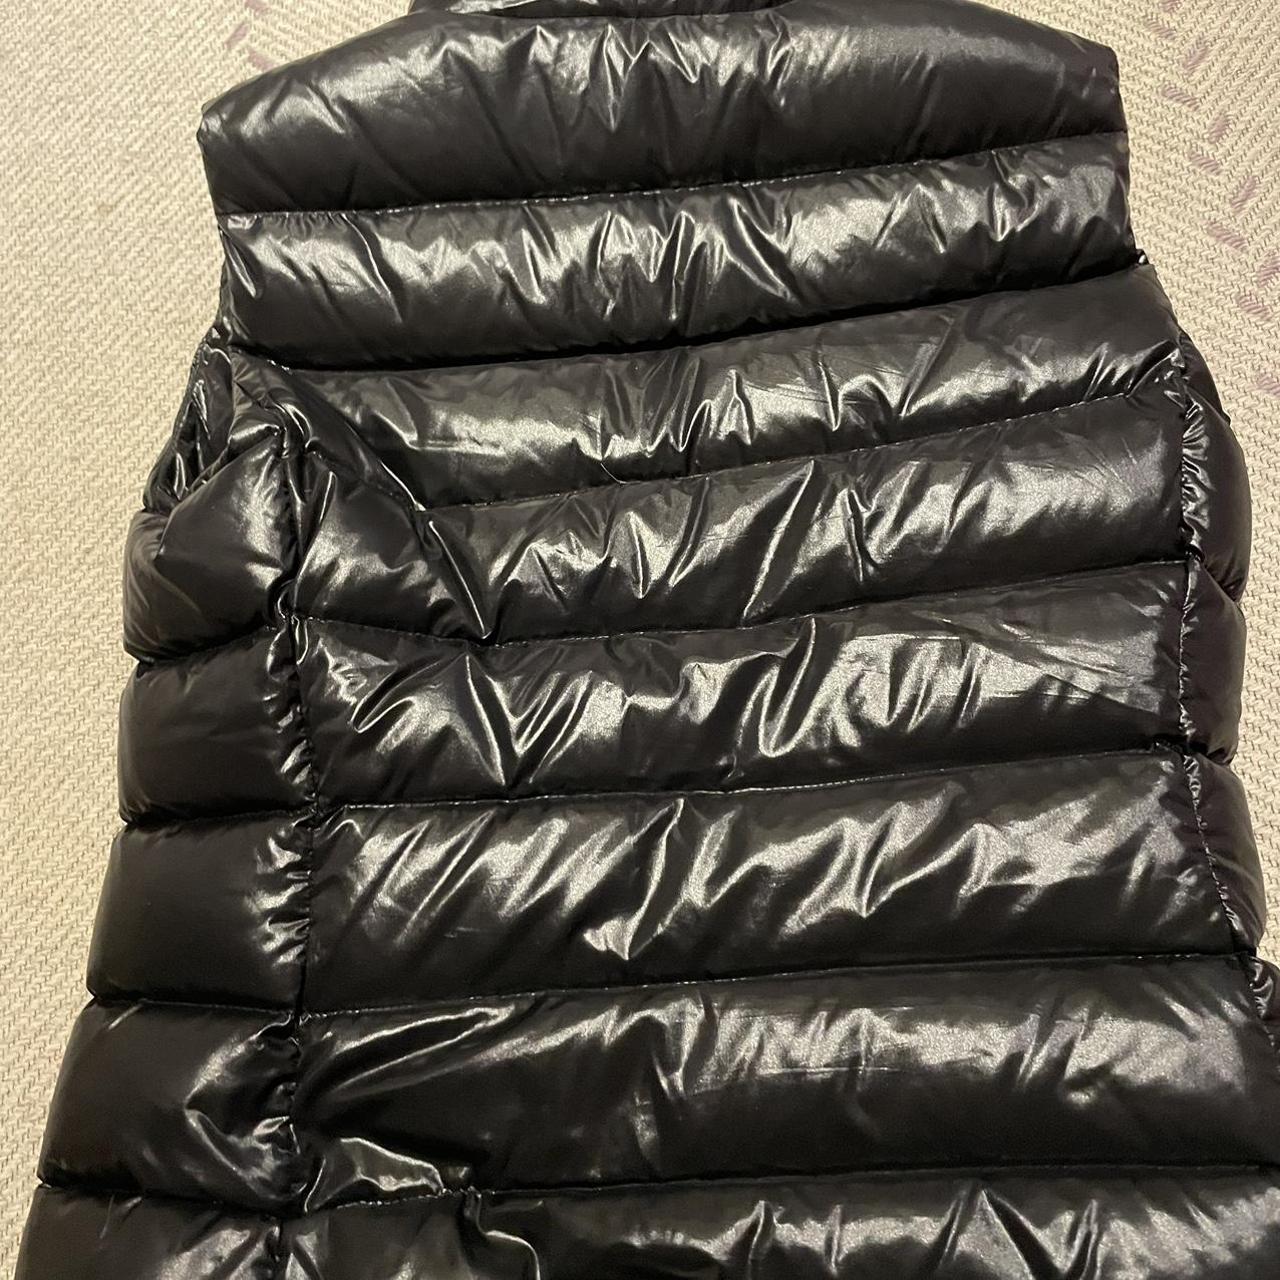 Product Image 2 - Black Moncler puffy vest 
Very